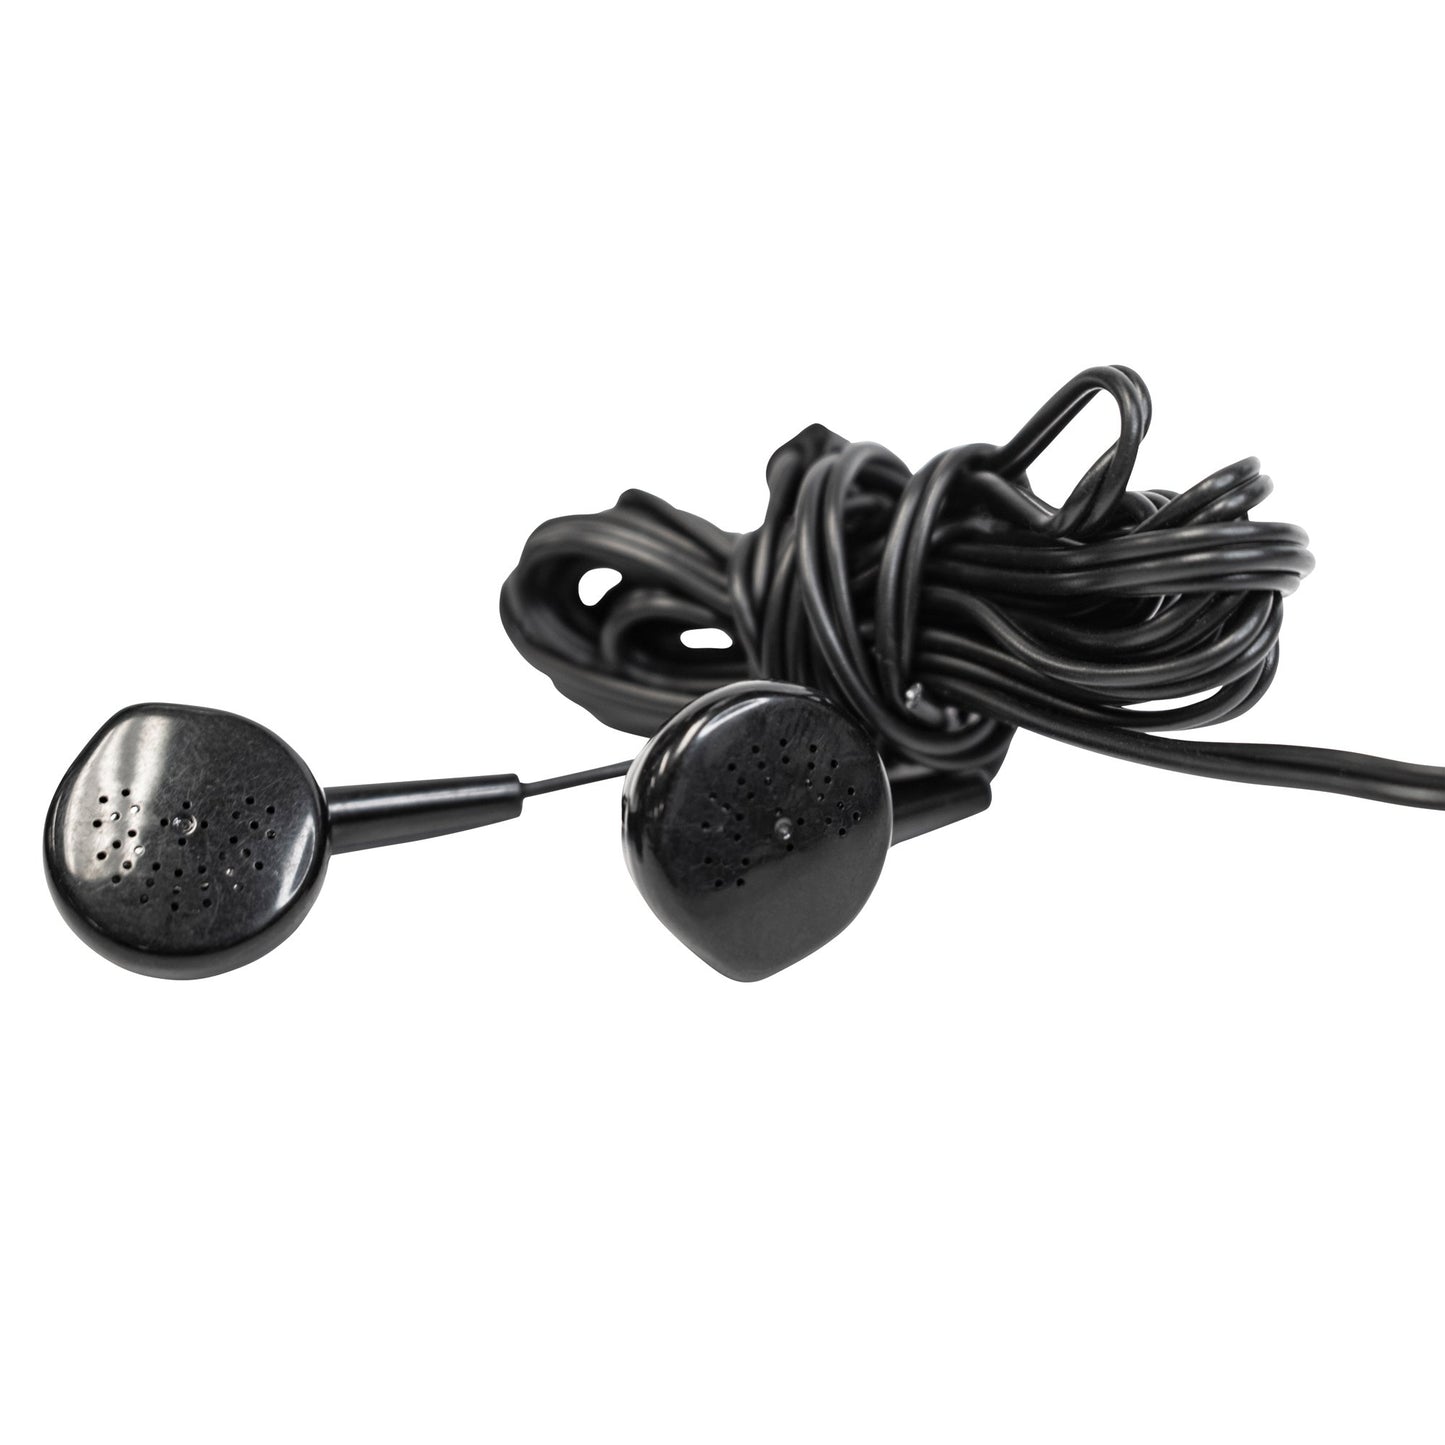 MAXELL 199846 EB-95M On-Ear Wired Earbuds with Microphone